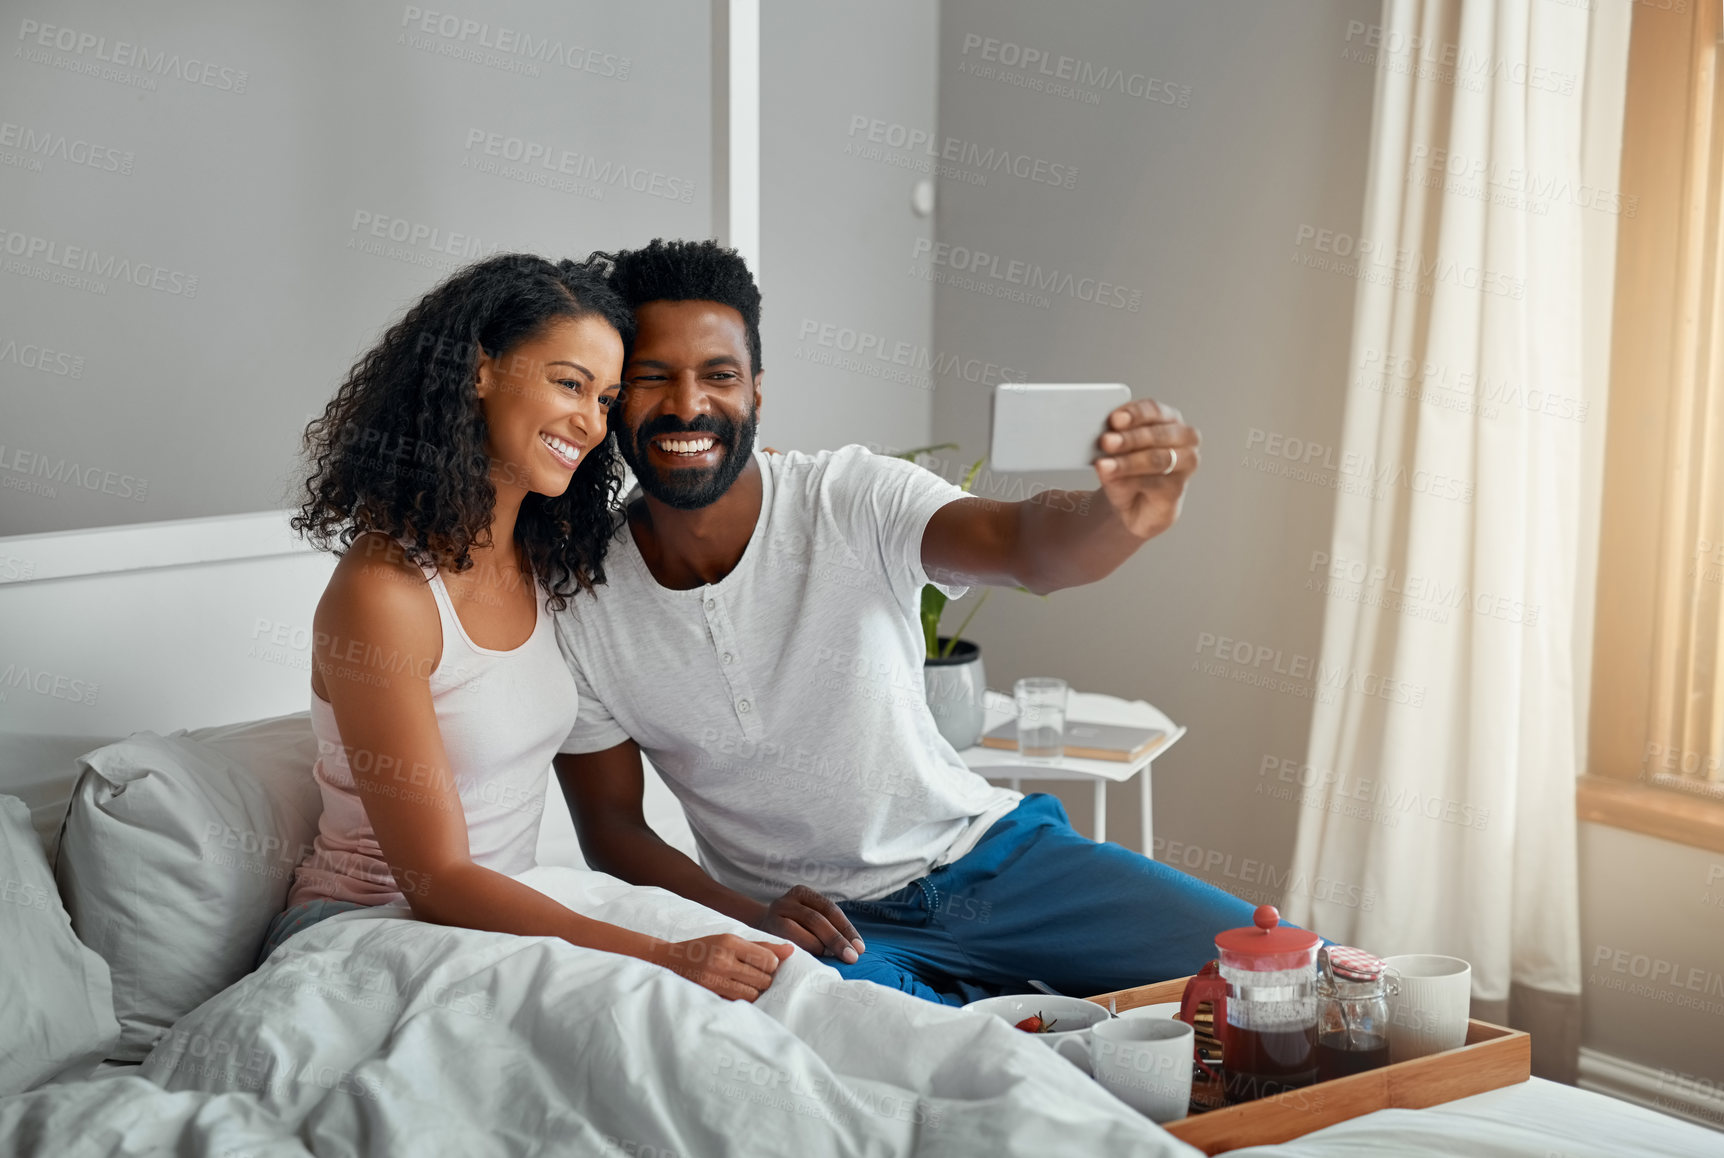 Buy stock photo Cropped shot a young attractive couple taking a selfie while having breakfast in bed at home